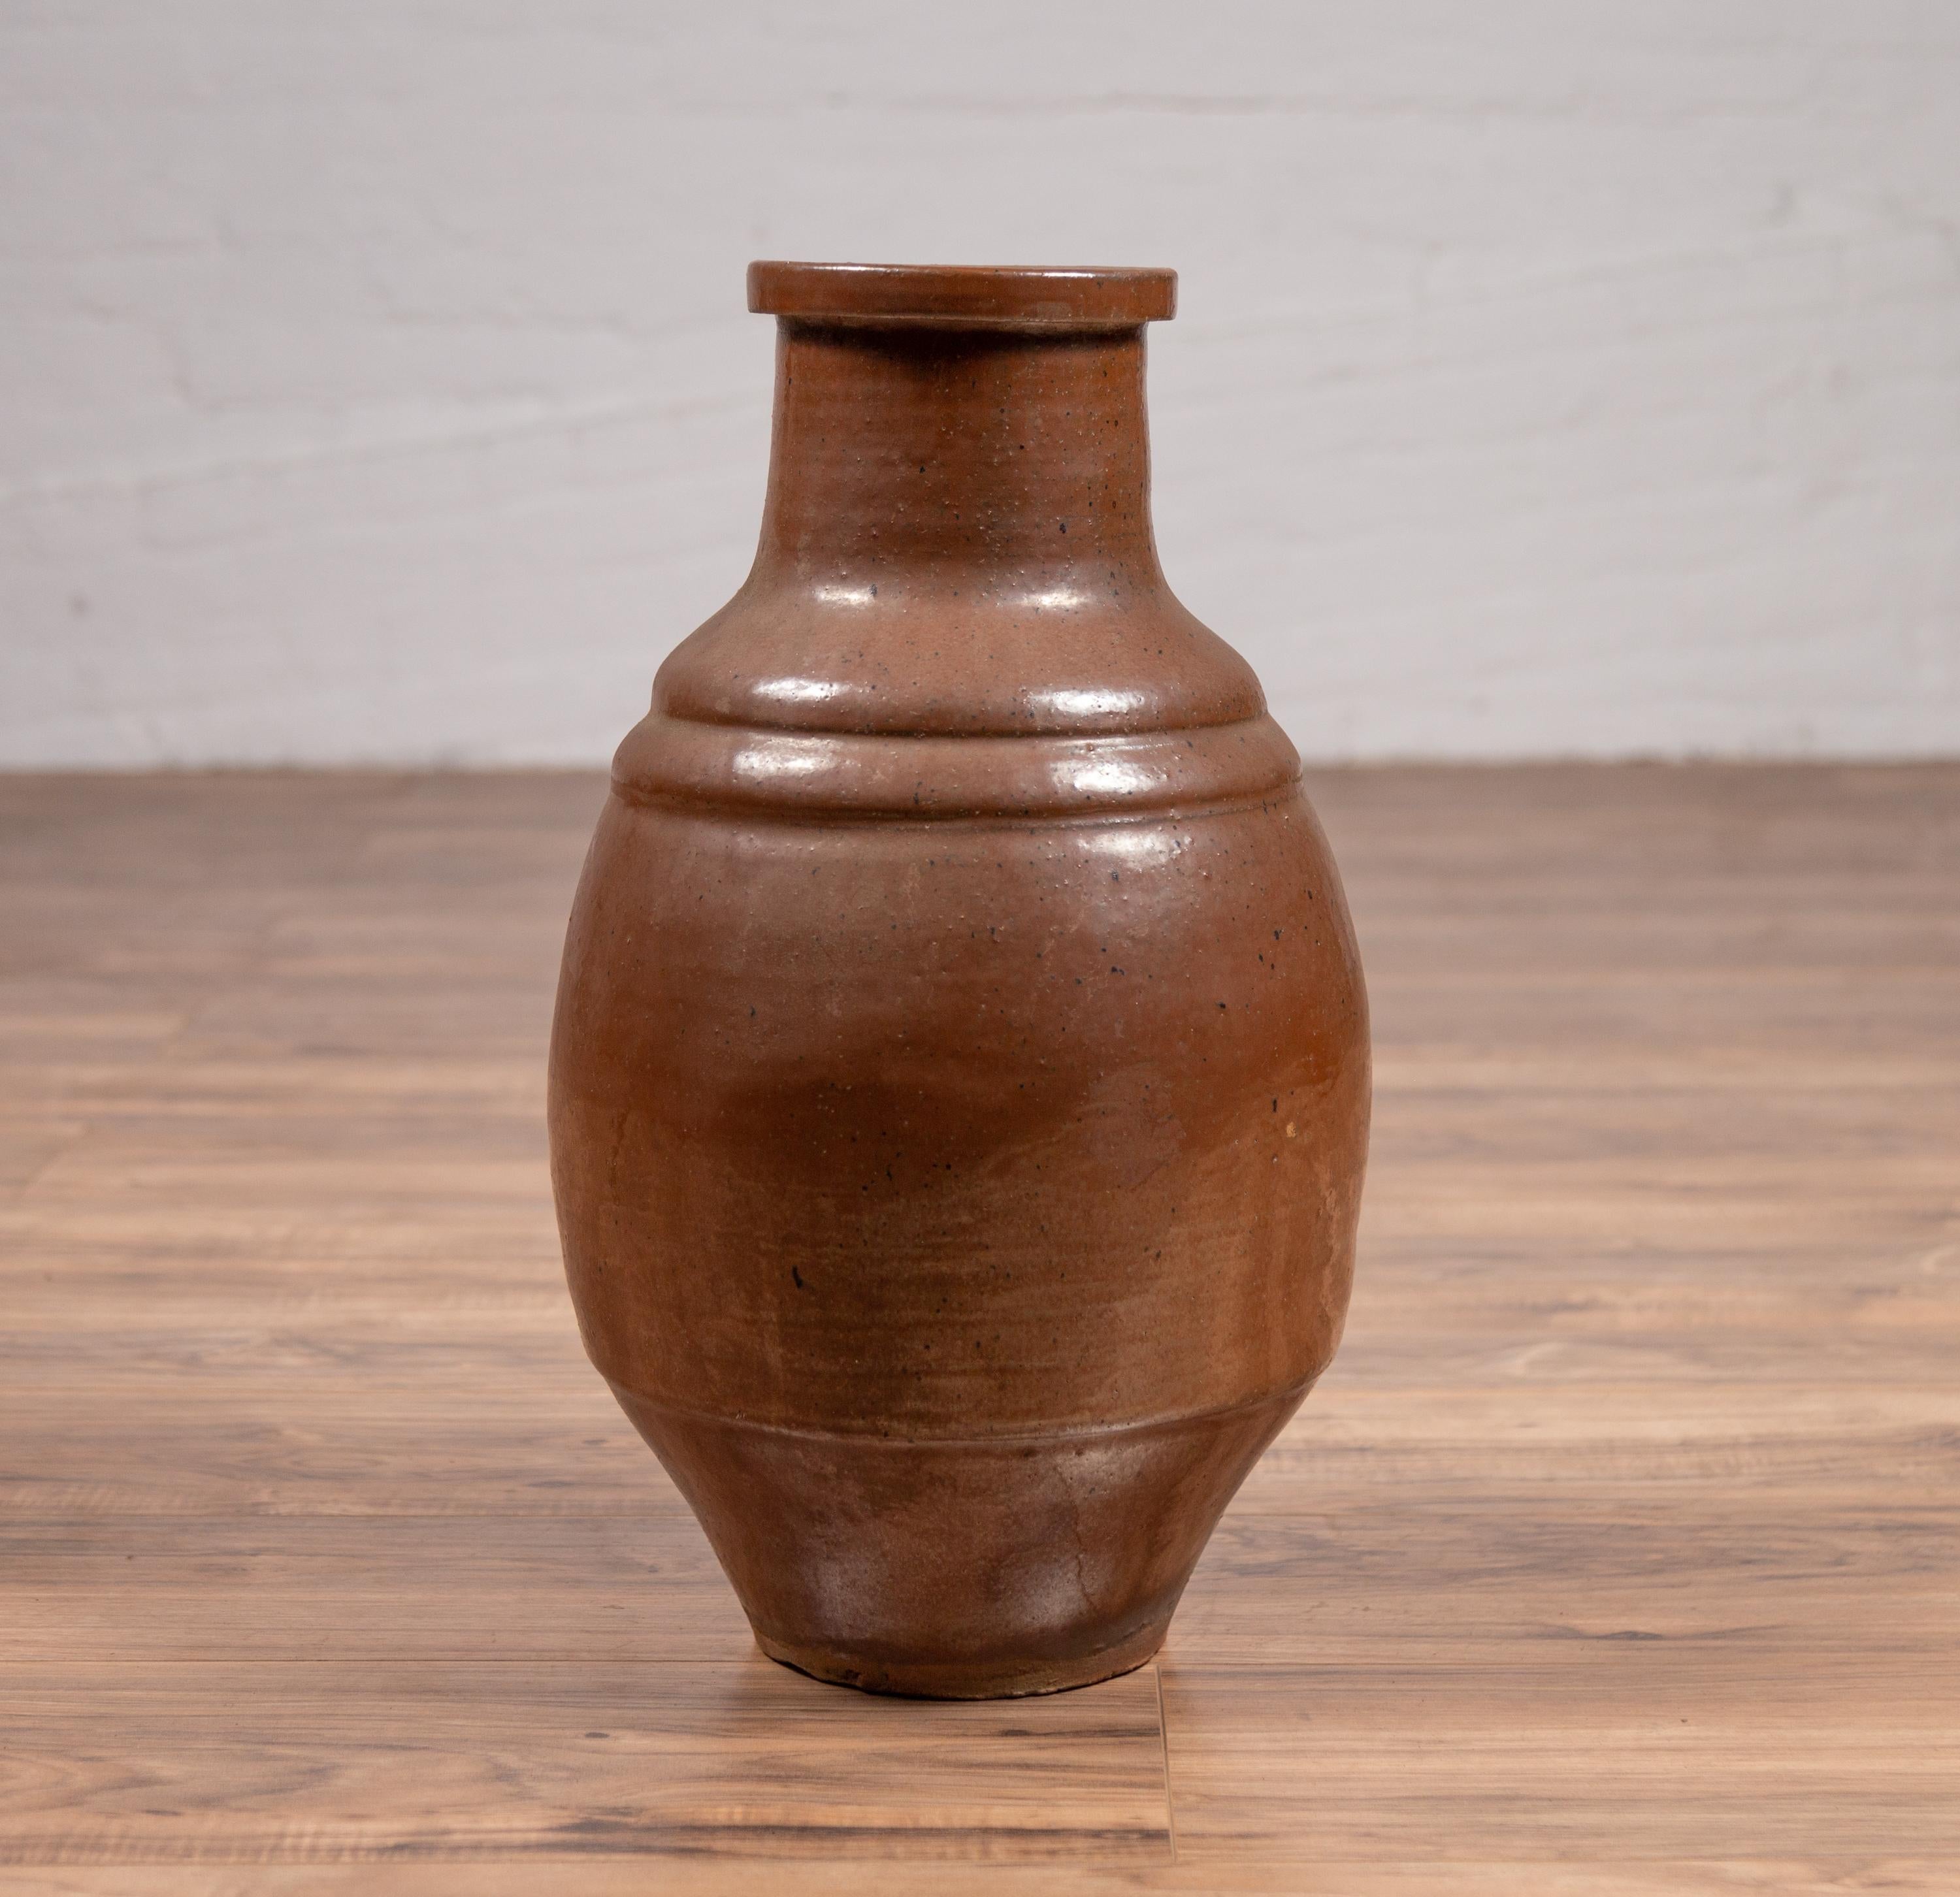 A Japanese Tamba Tachikui ware brown glazed water jug from the 19th century. Boasting a lovely monochrome brown color, this Japanese jug was produced in one of Japan’s six famous ancient kilns. Showcasing a circular body with narrow neck, ribbed